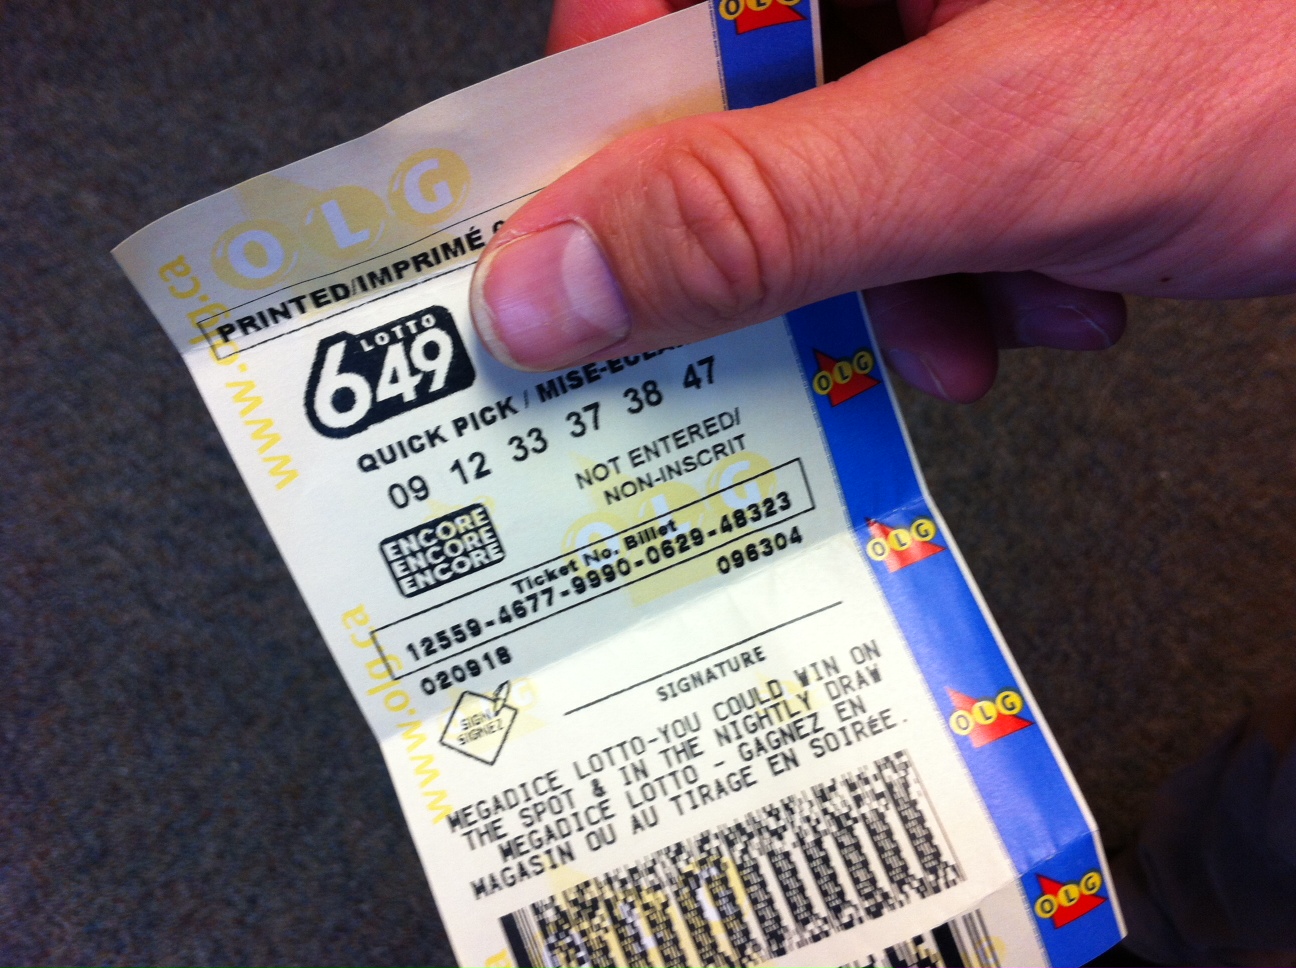 649 Lottery Results Canada